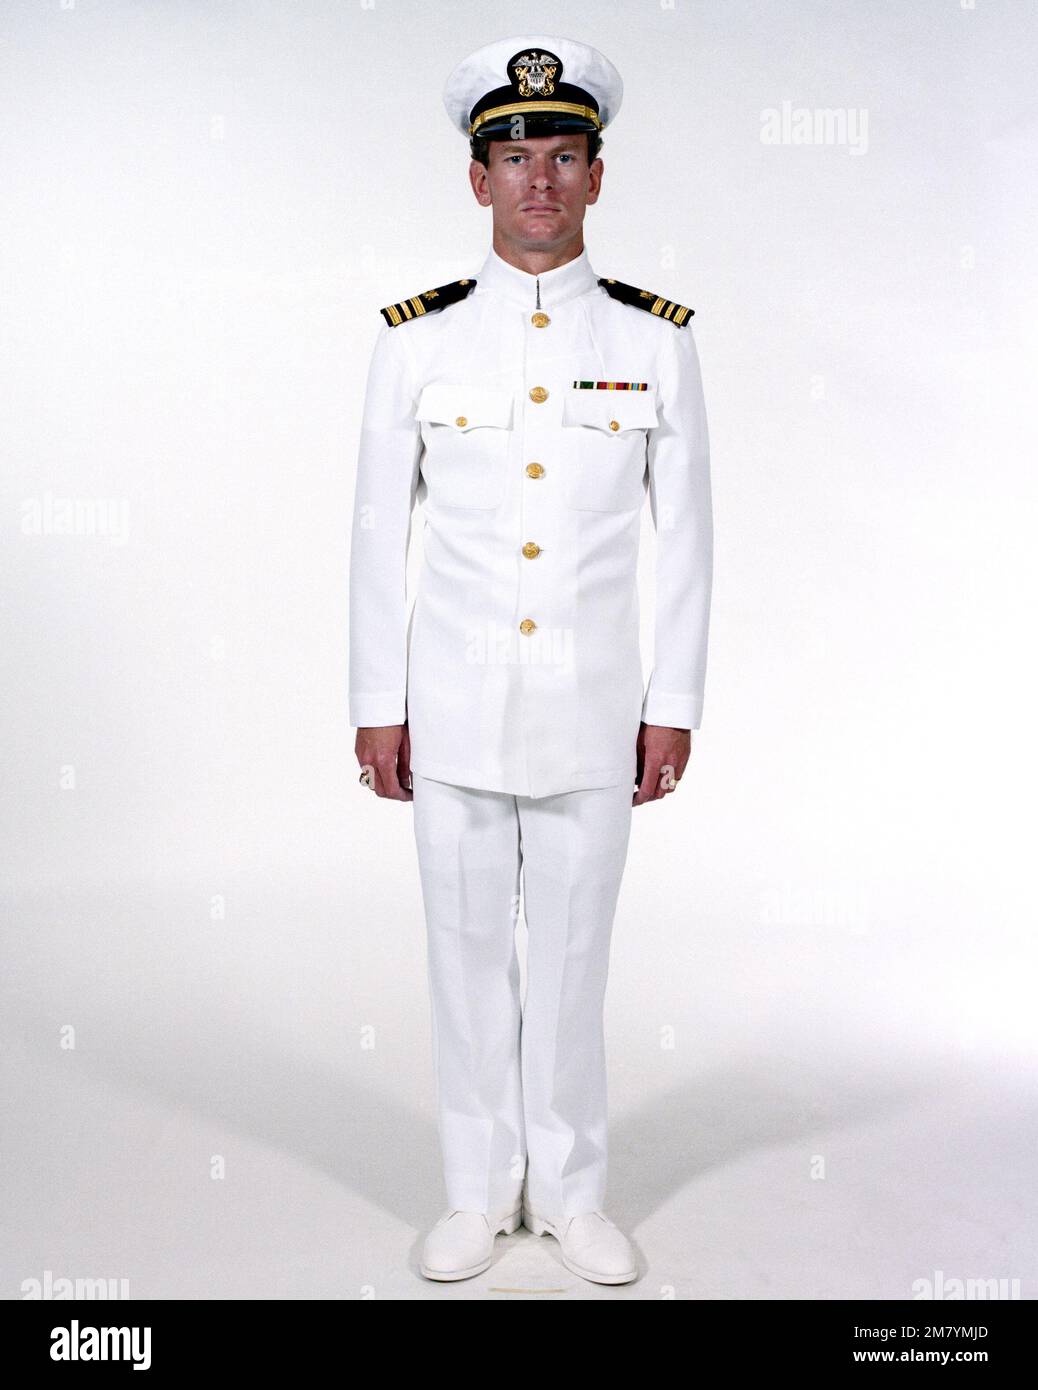 Uniform: Service dress white, male Navy officers. Country: Unknown ...